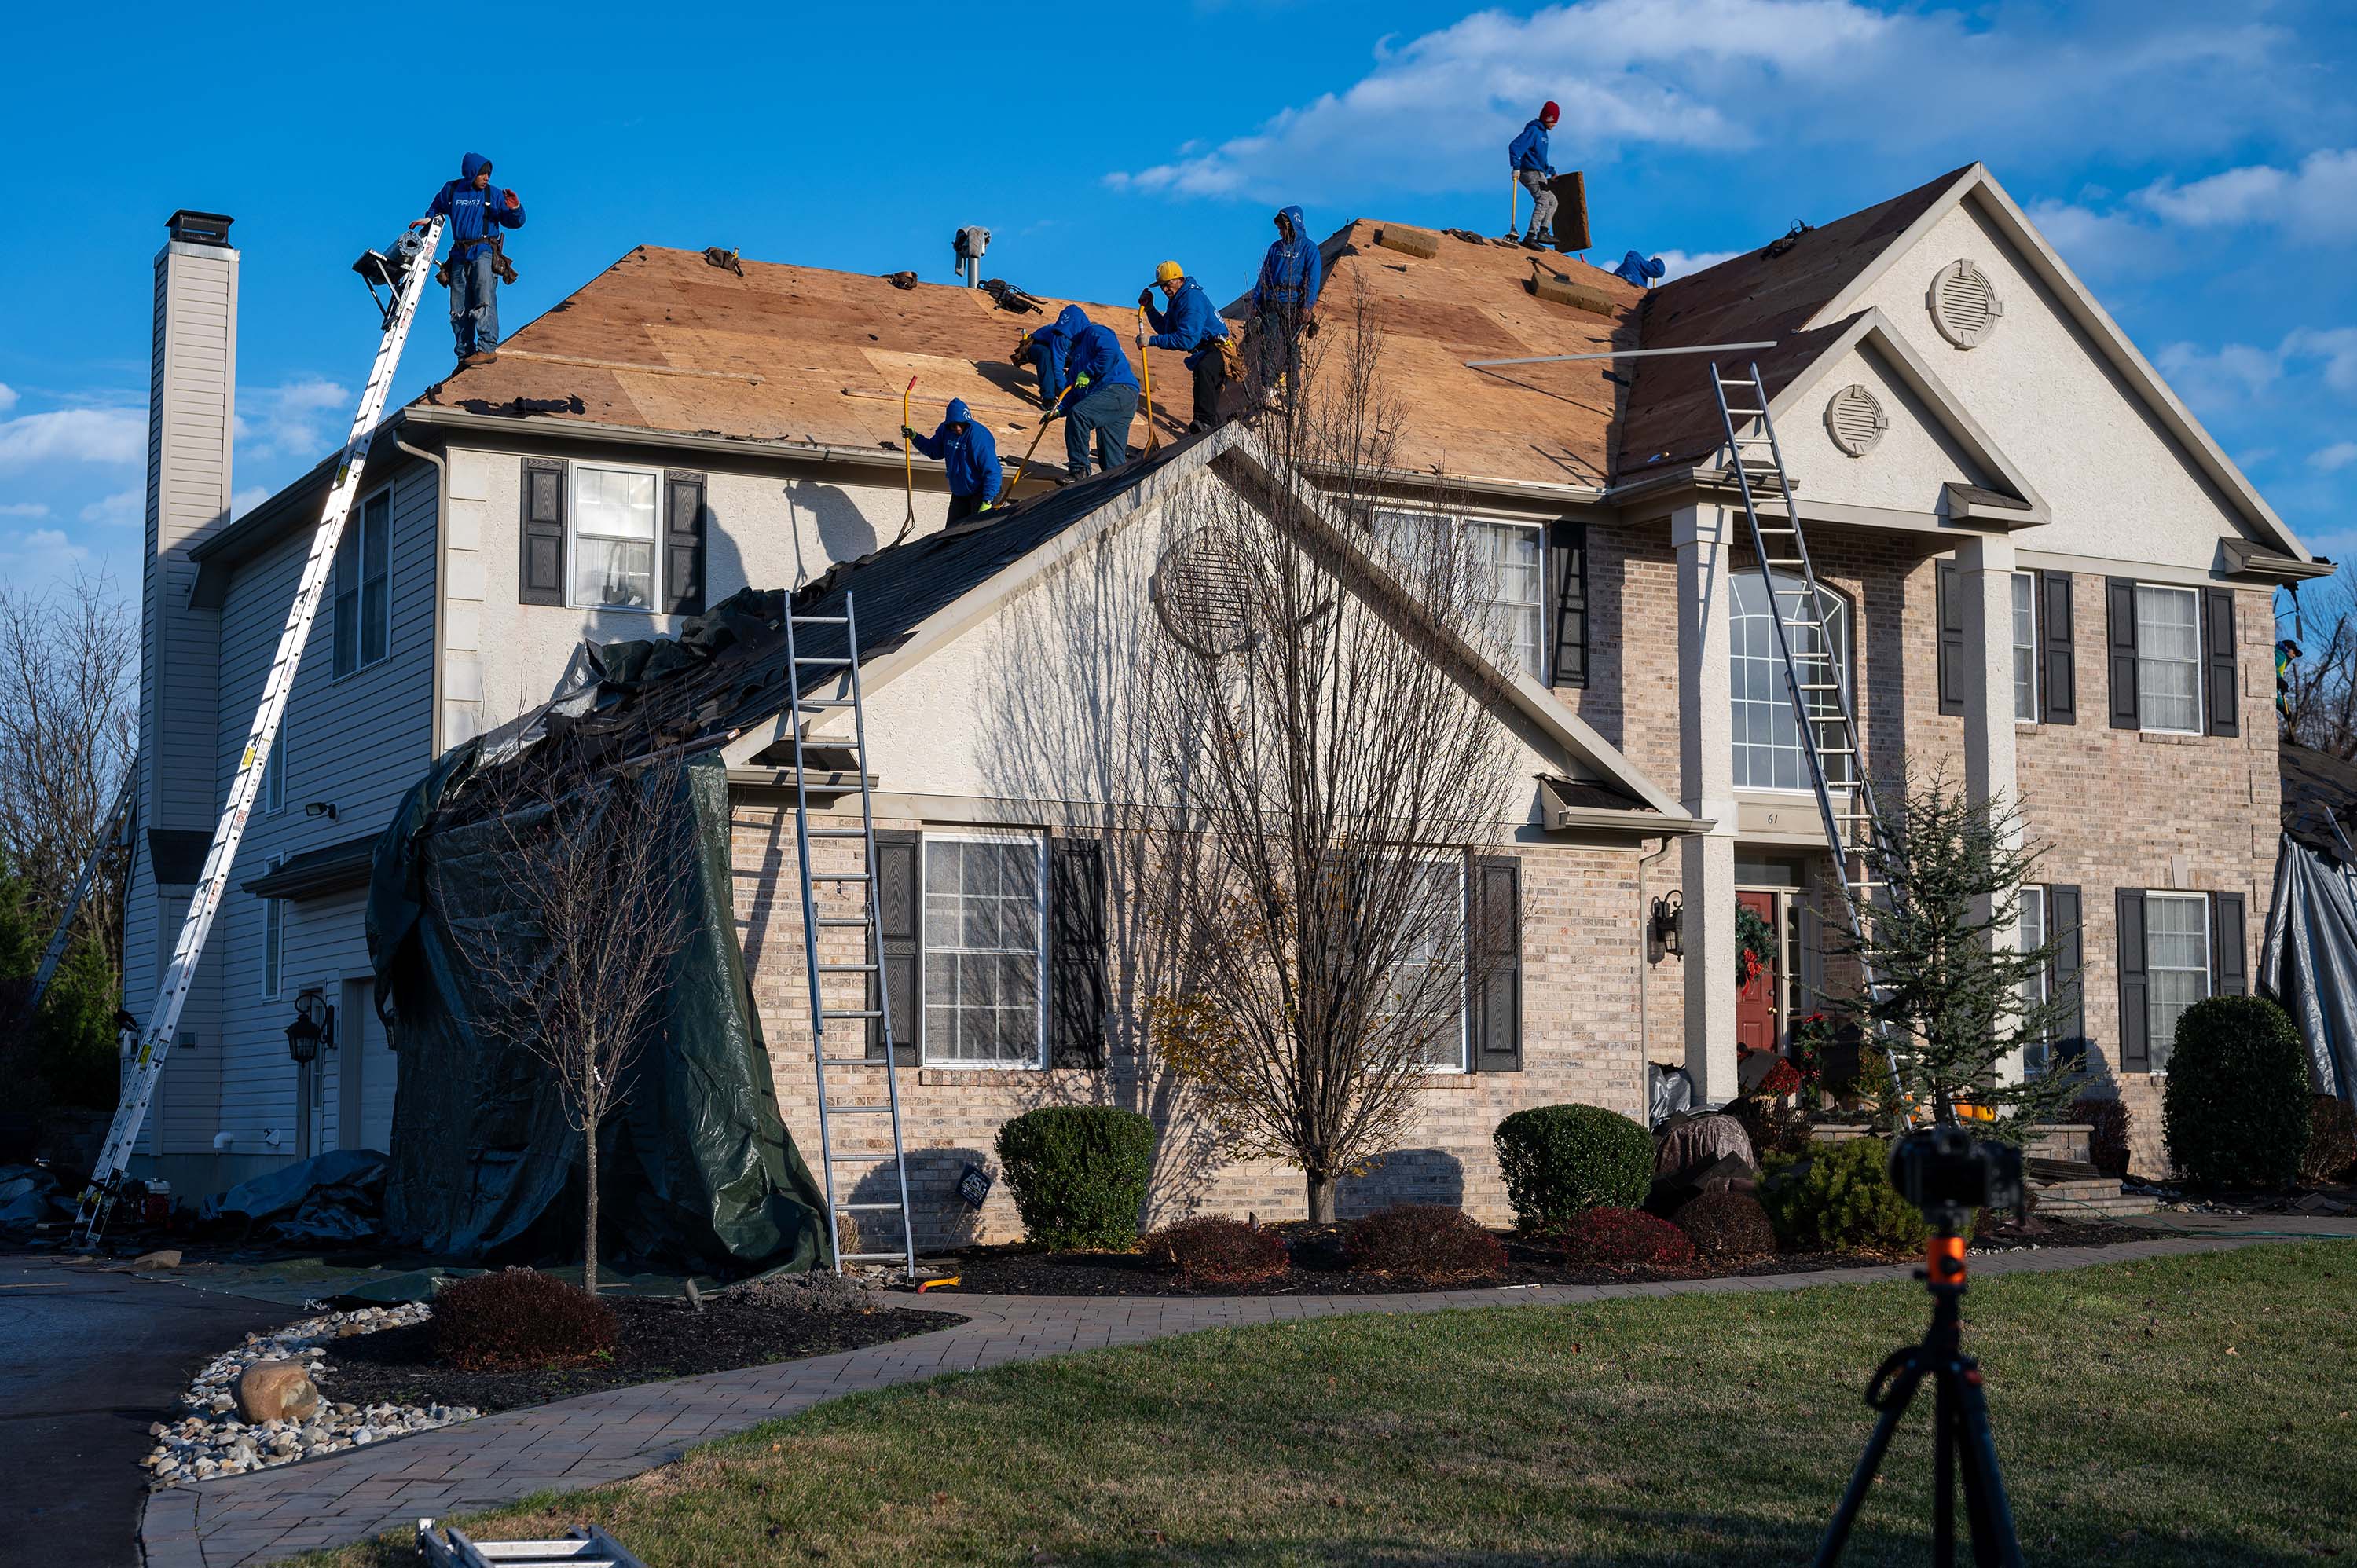 New Hope Roofing repair company - residential roofing contractors in New Hope, PA (large image)